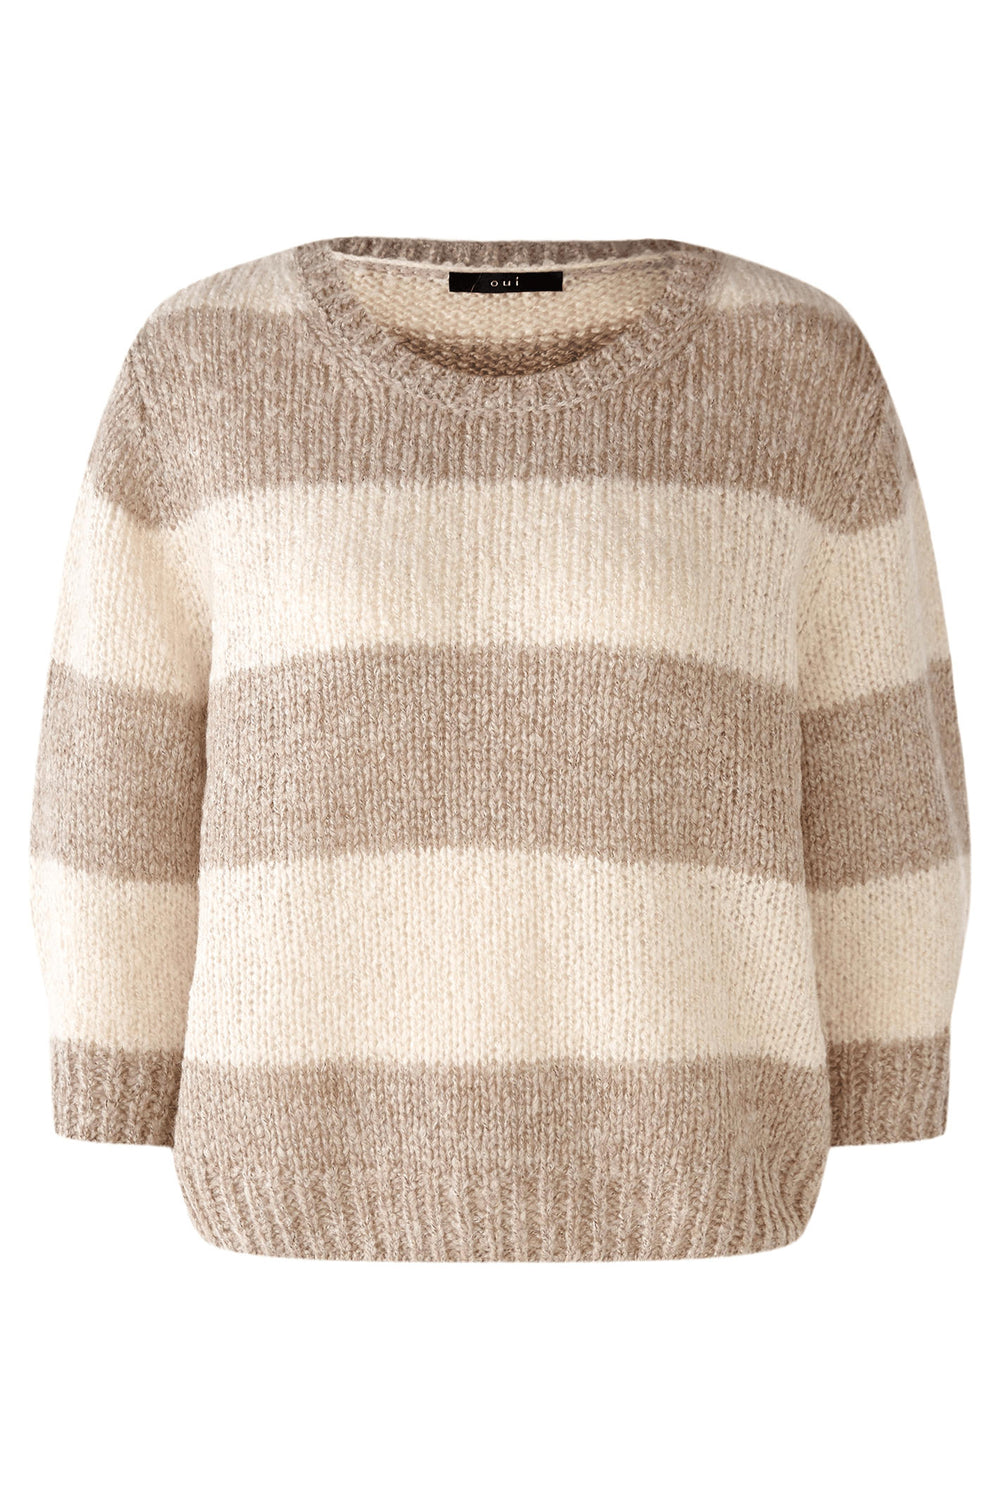 Oui 79633 Brown Striped Wide Neck Jumper - Dotique Chesterfield